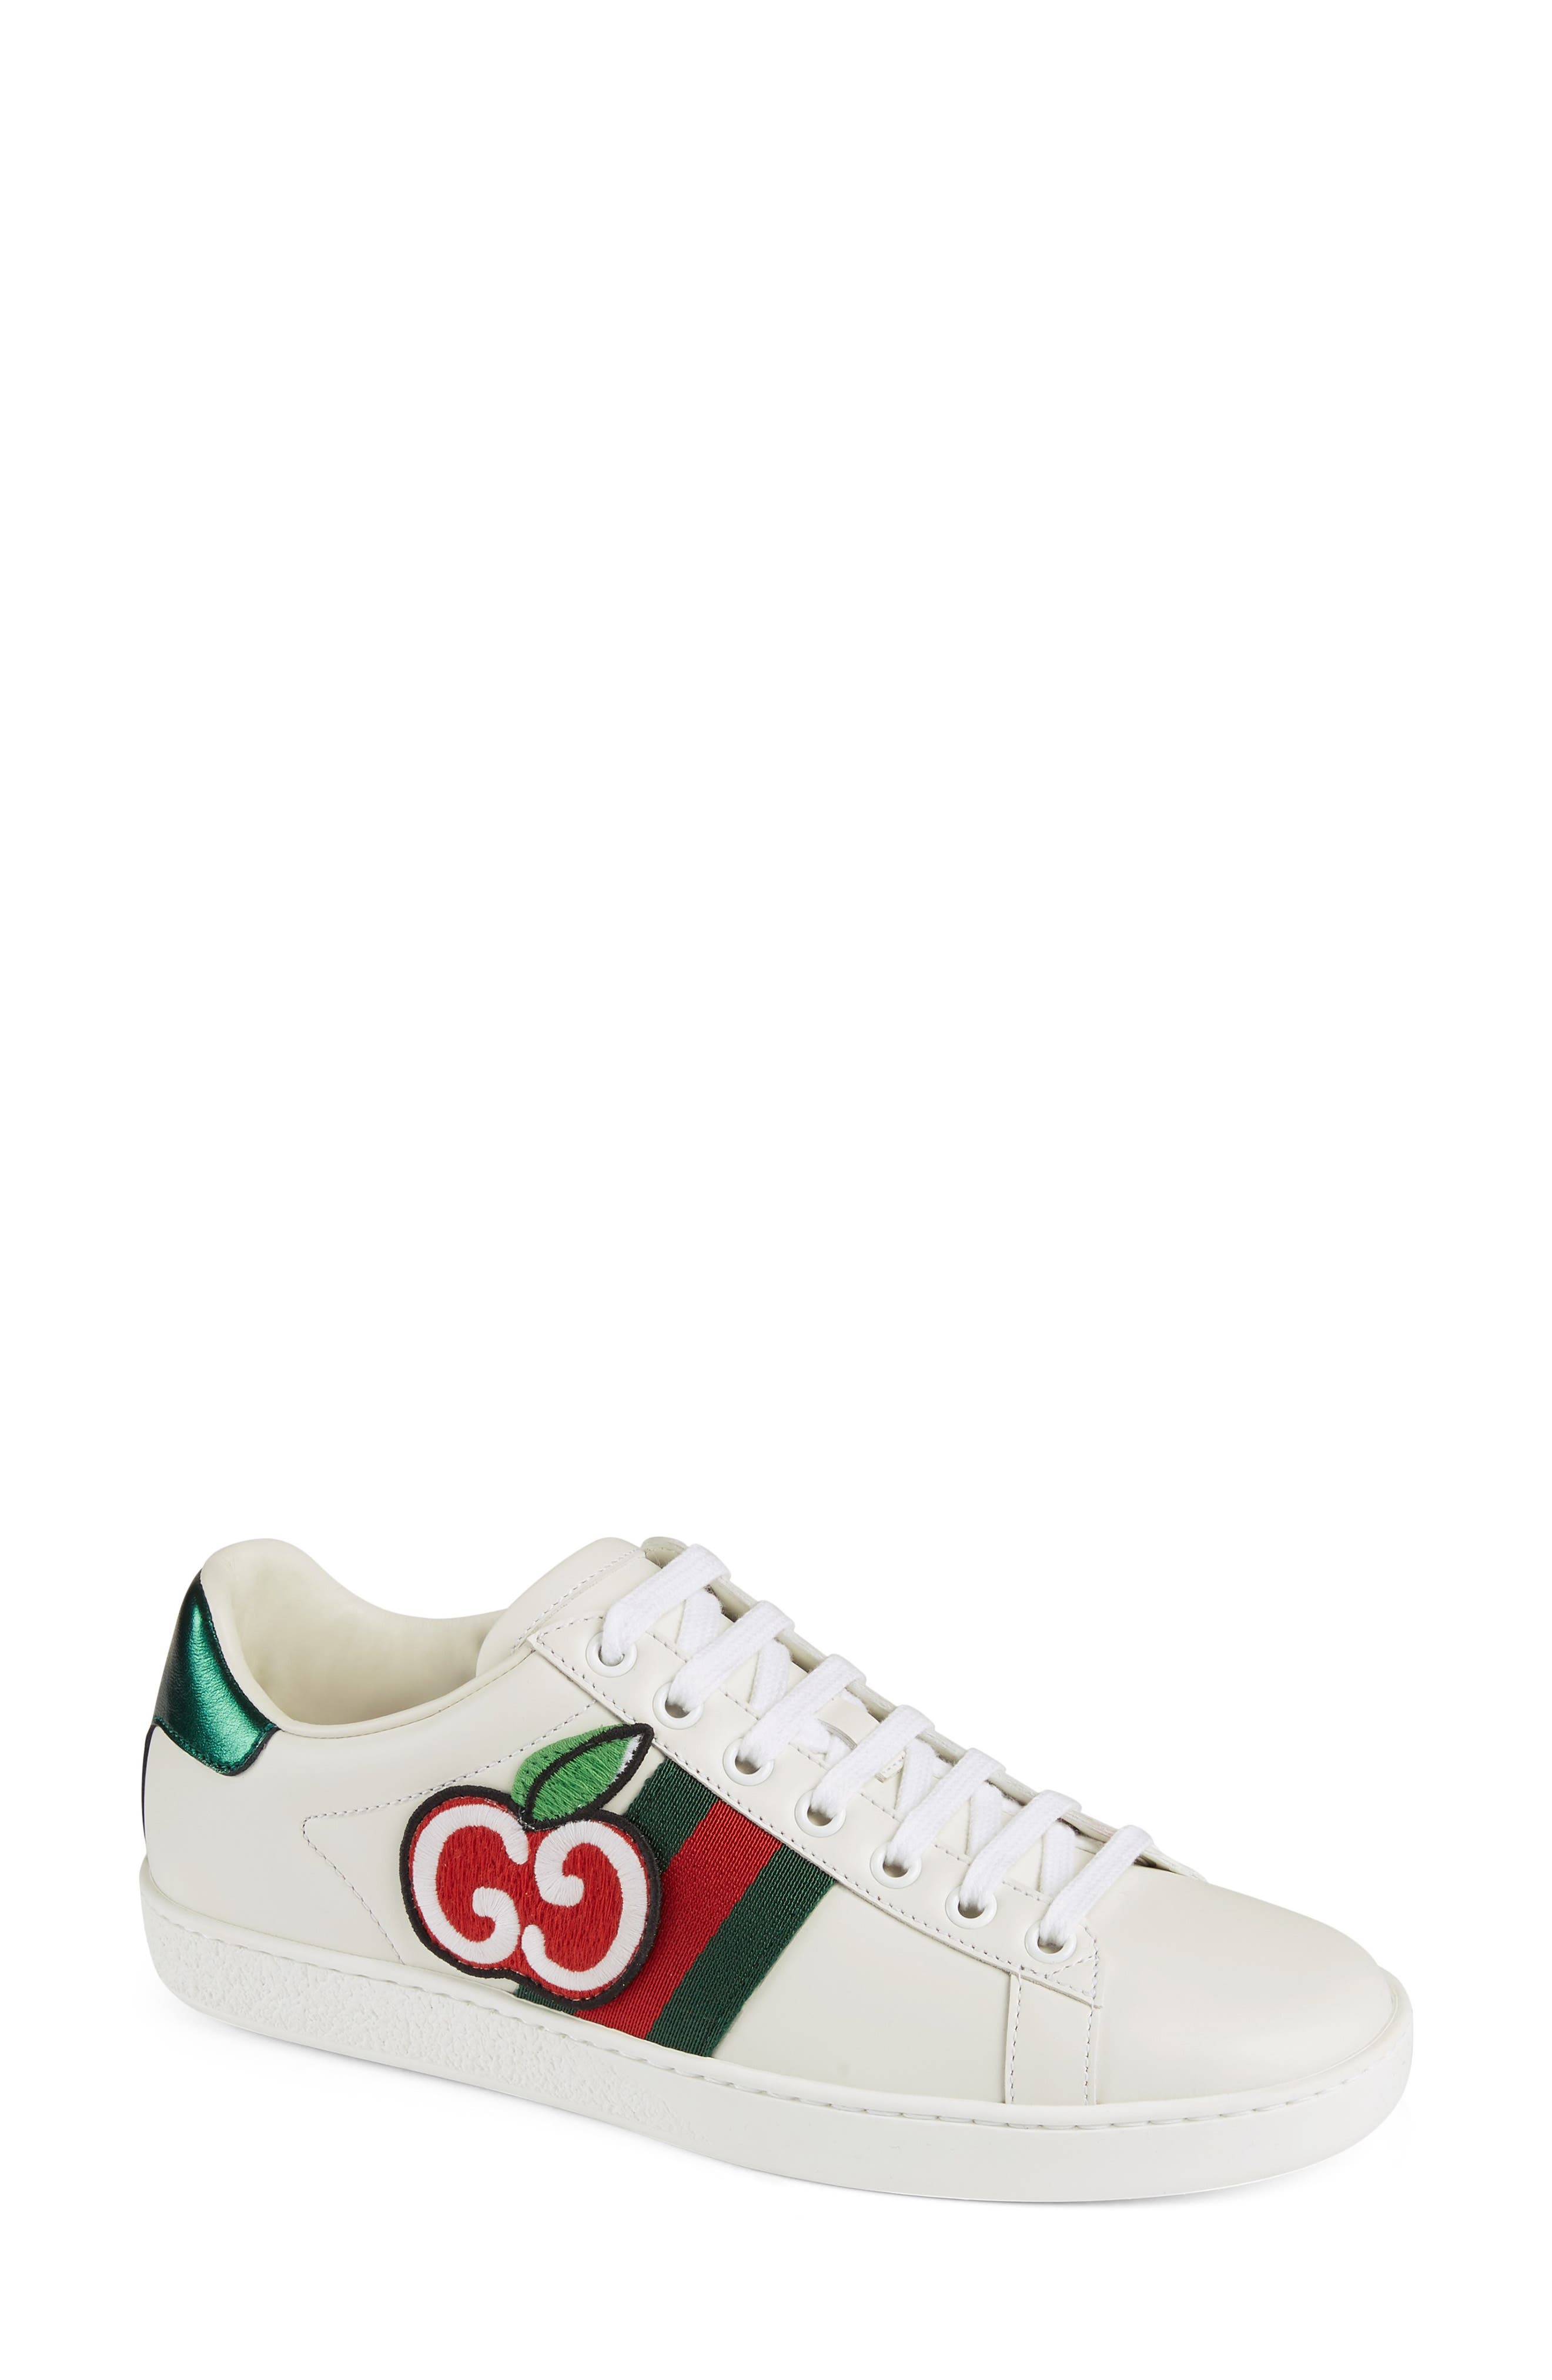 gucci ace sneakers nordstrom